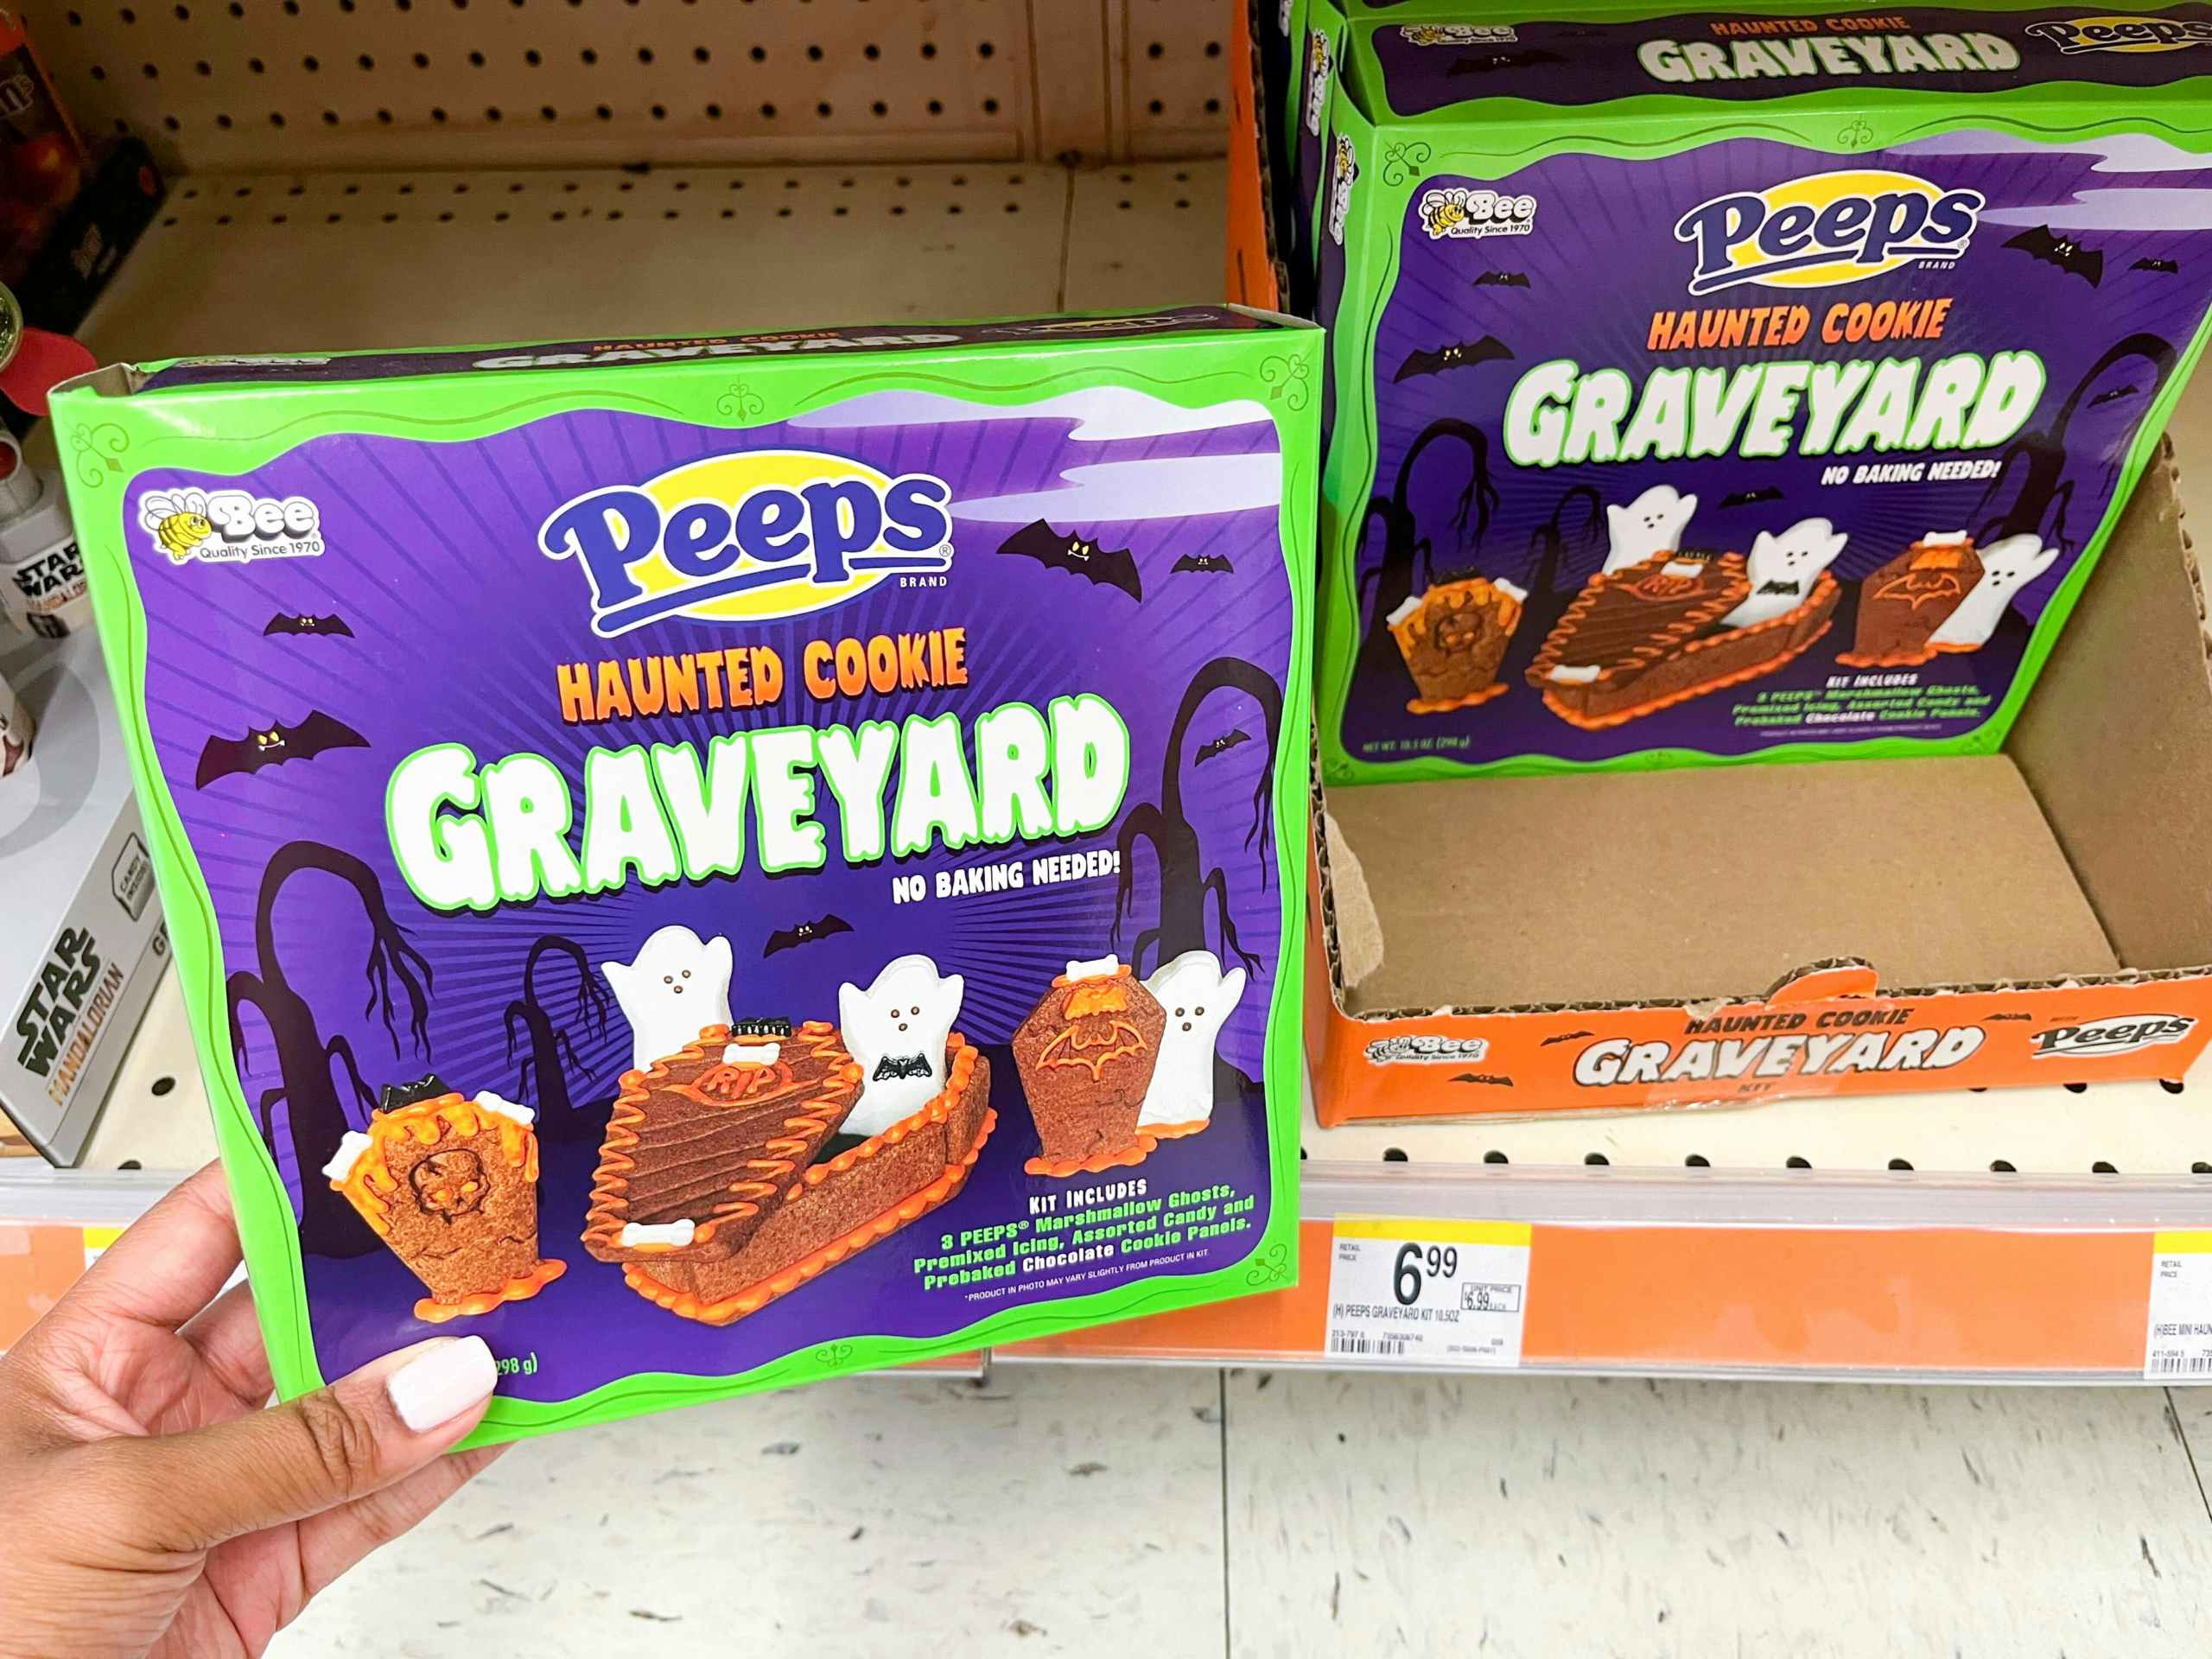 hand holding Peeps Haunted Cookie Graveyard box in front of price tag